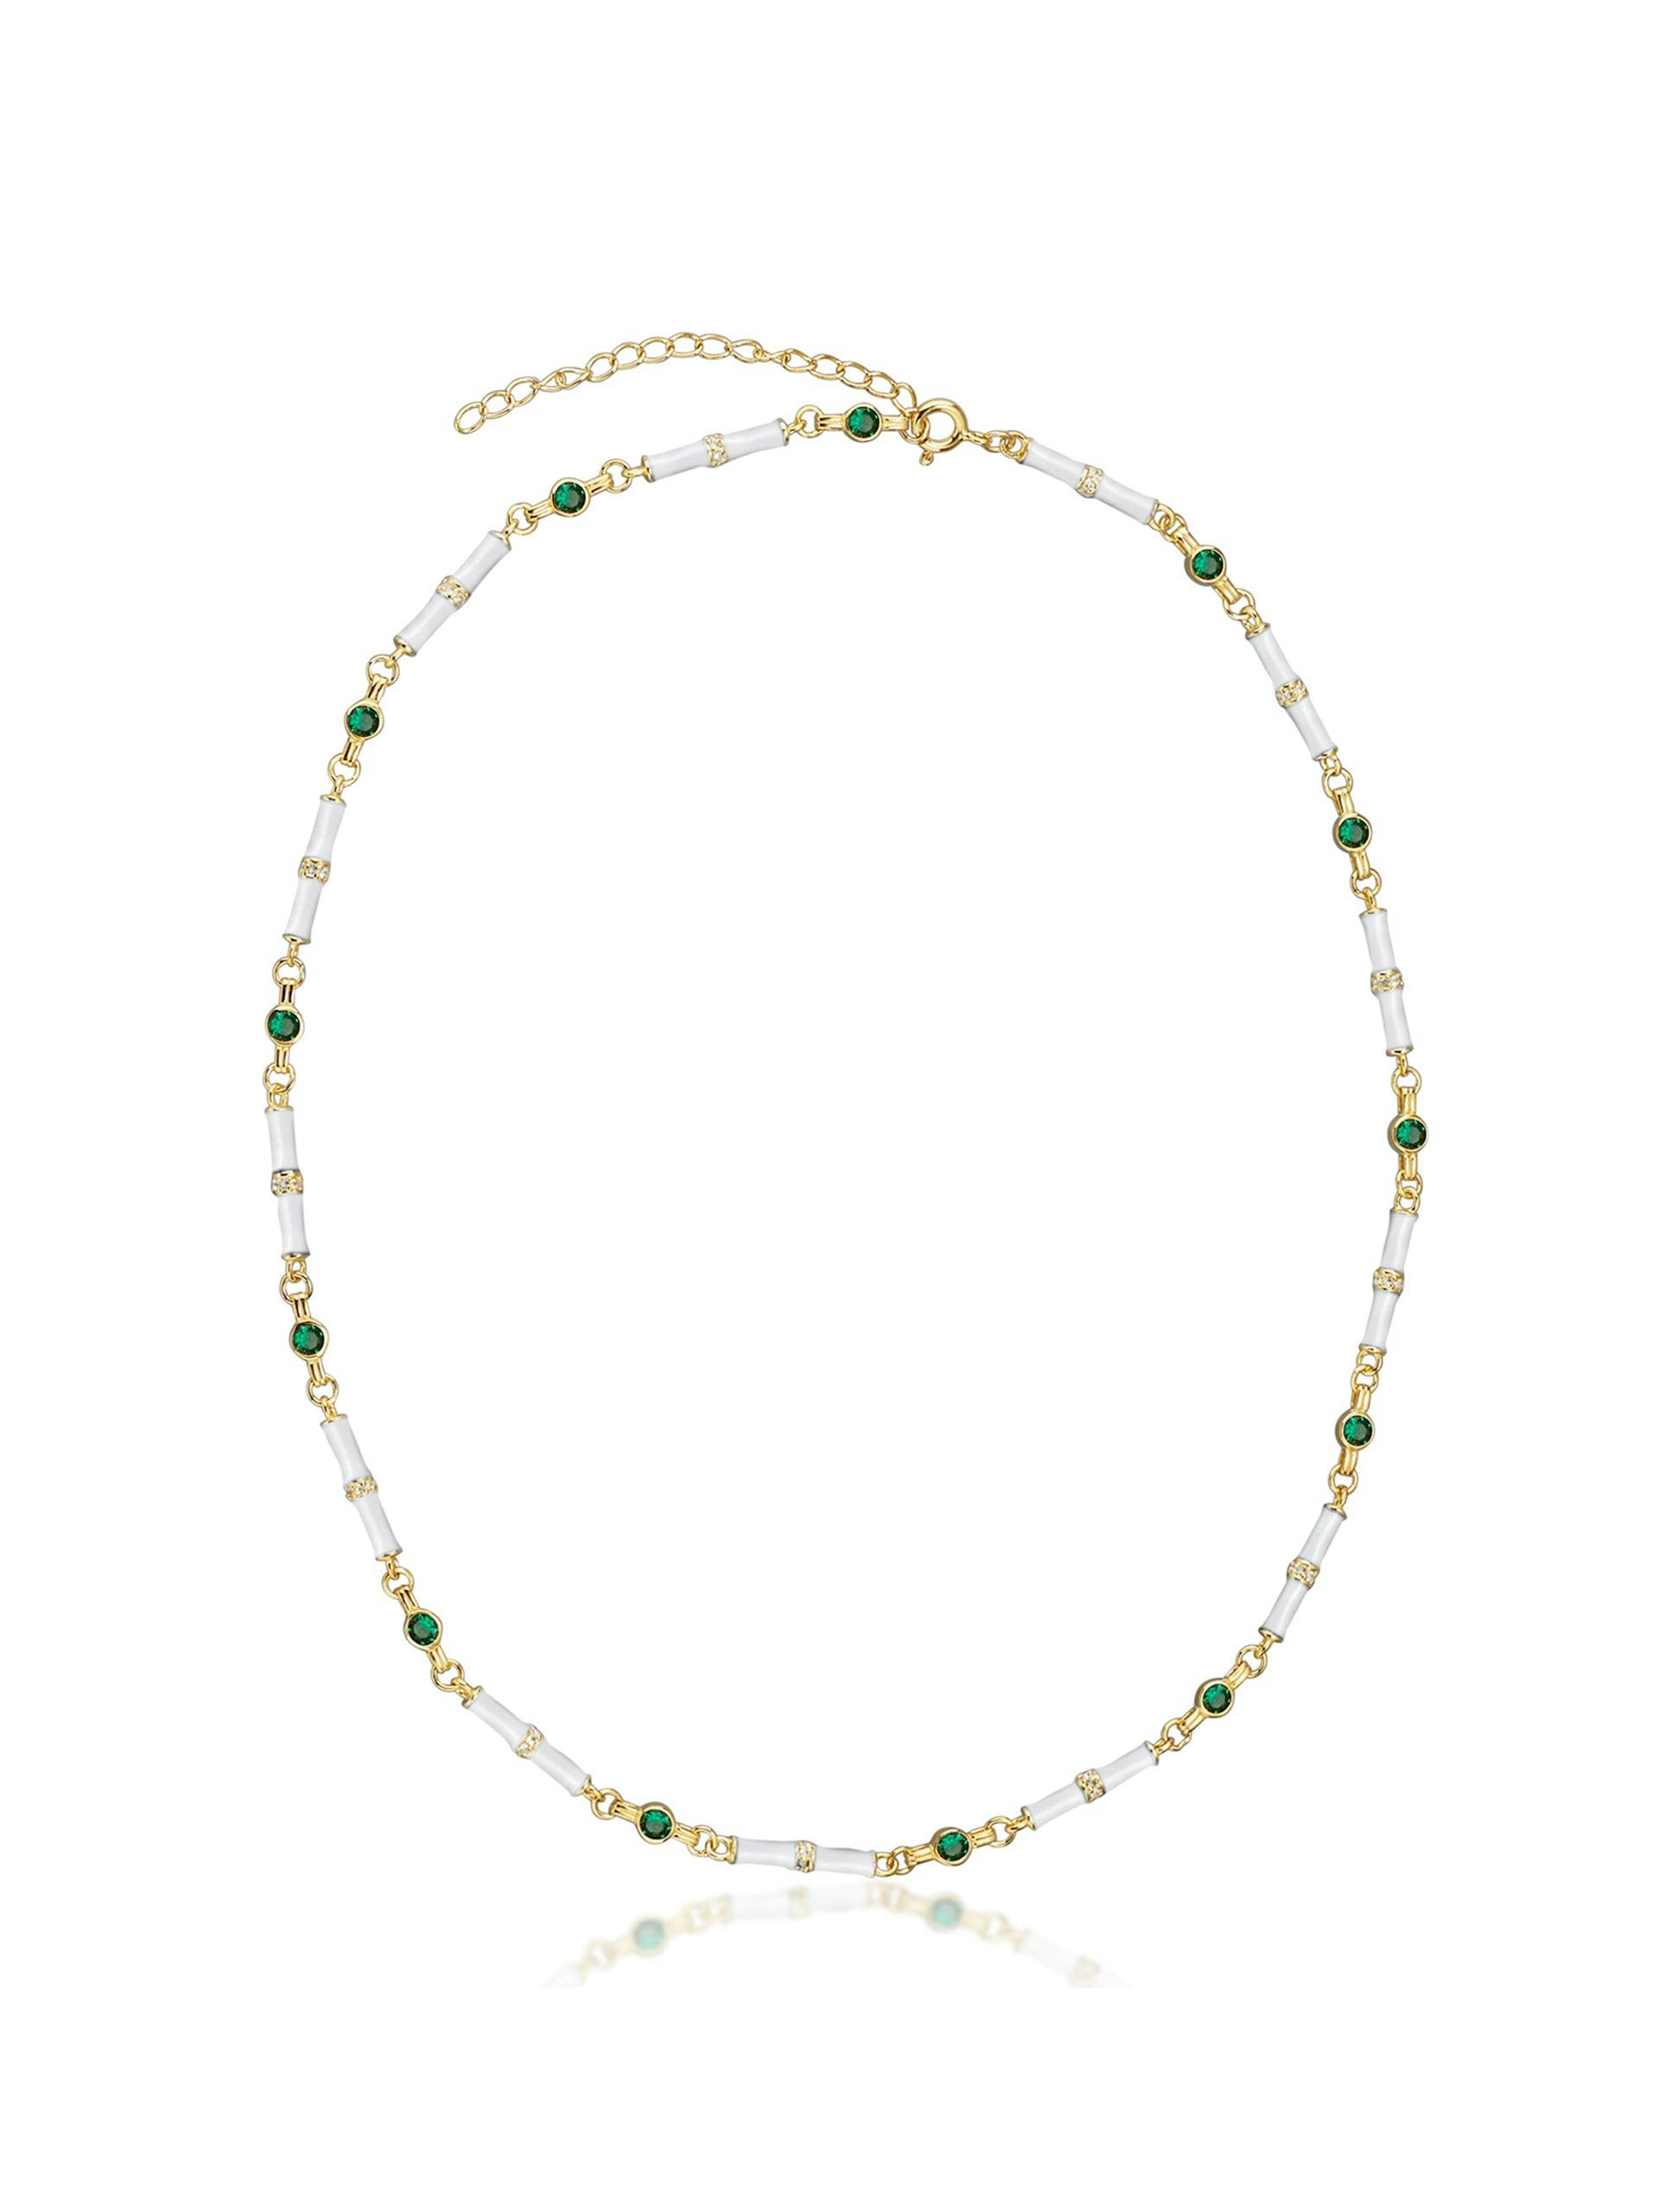 Marlowe white enamel necklace with emerald green stone